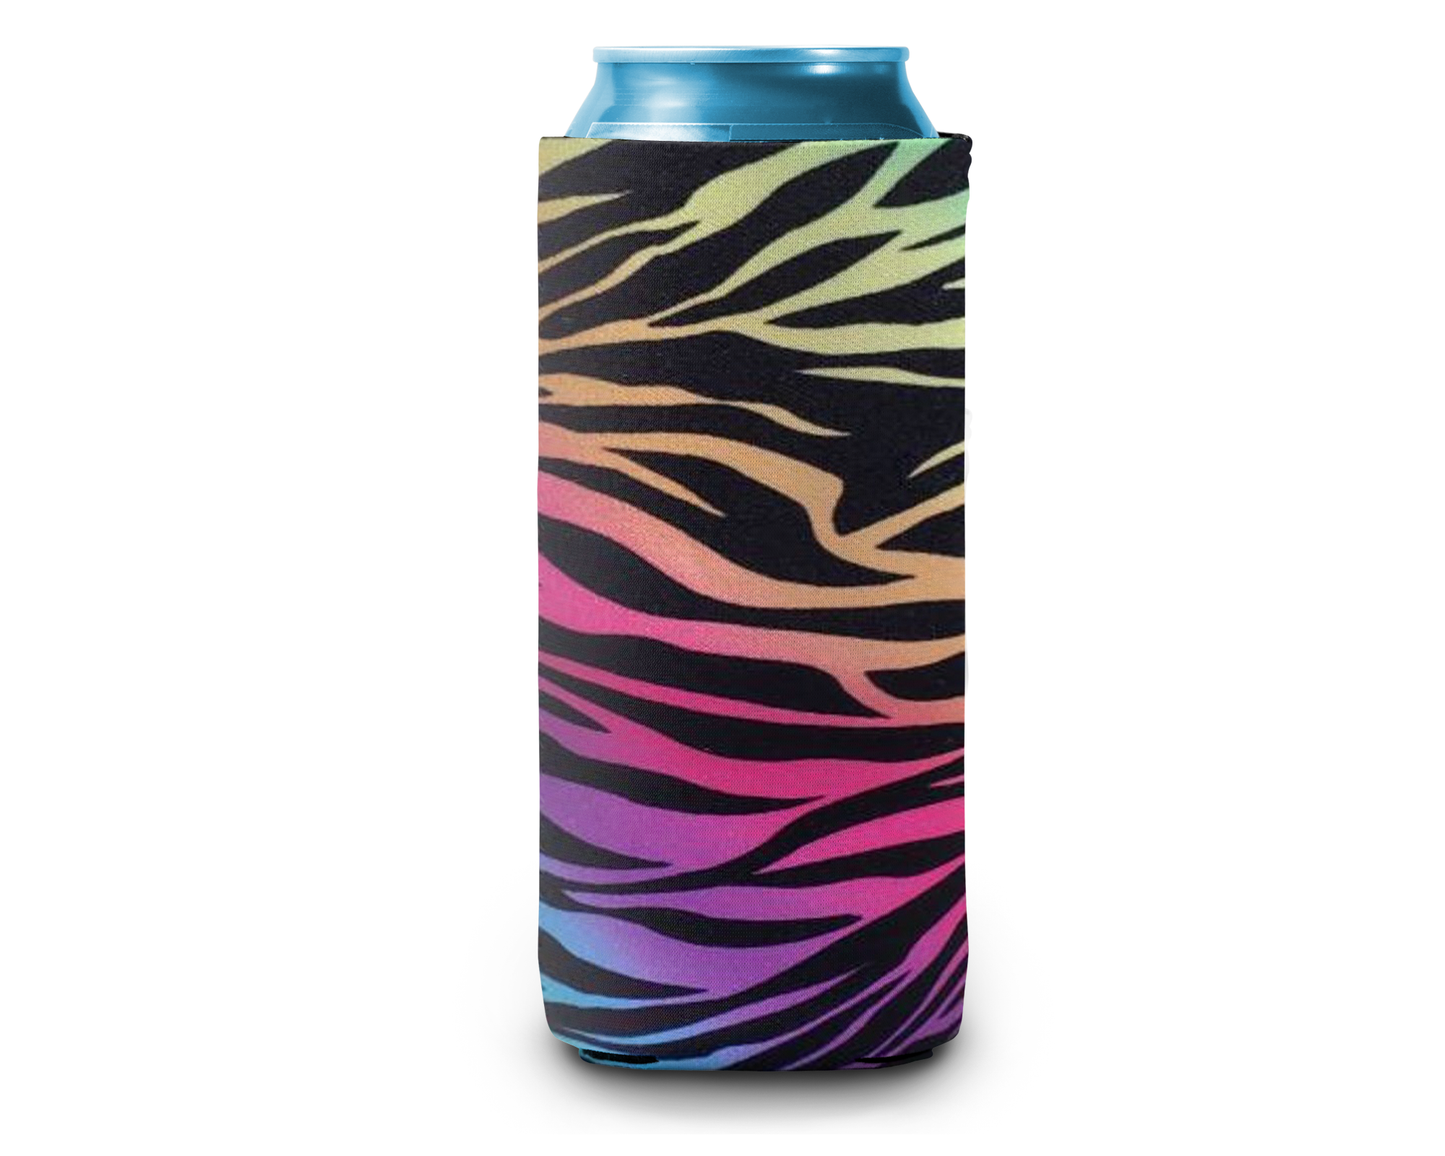 Slim Can Cooler by Skumps with rainbow tiger stripes